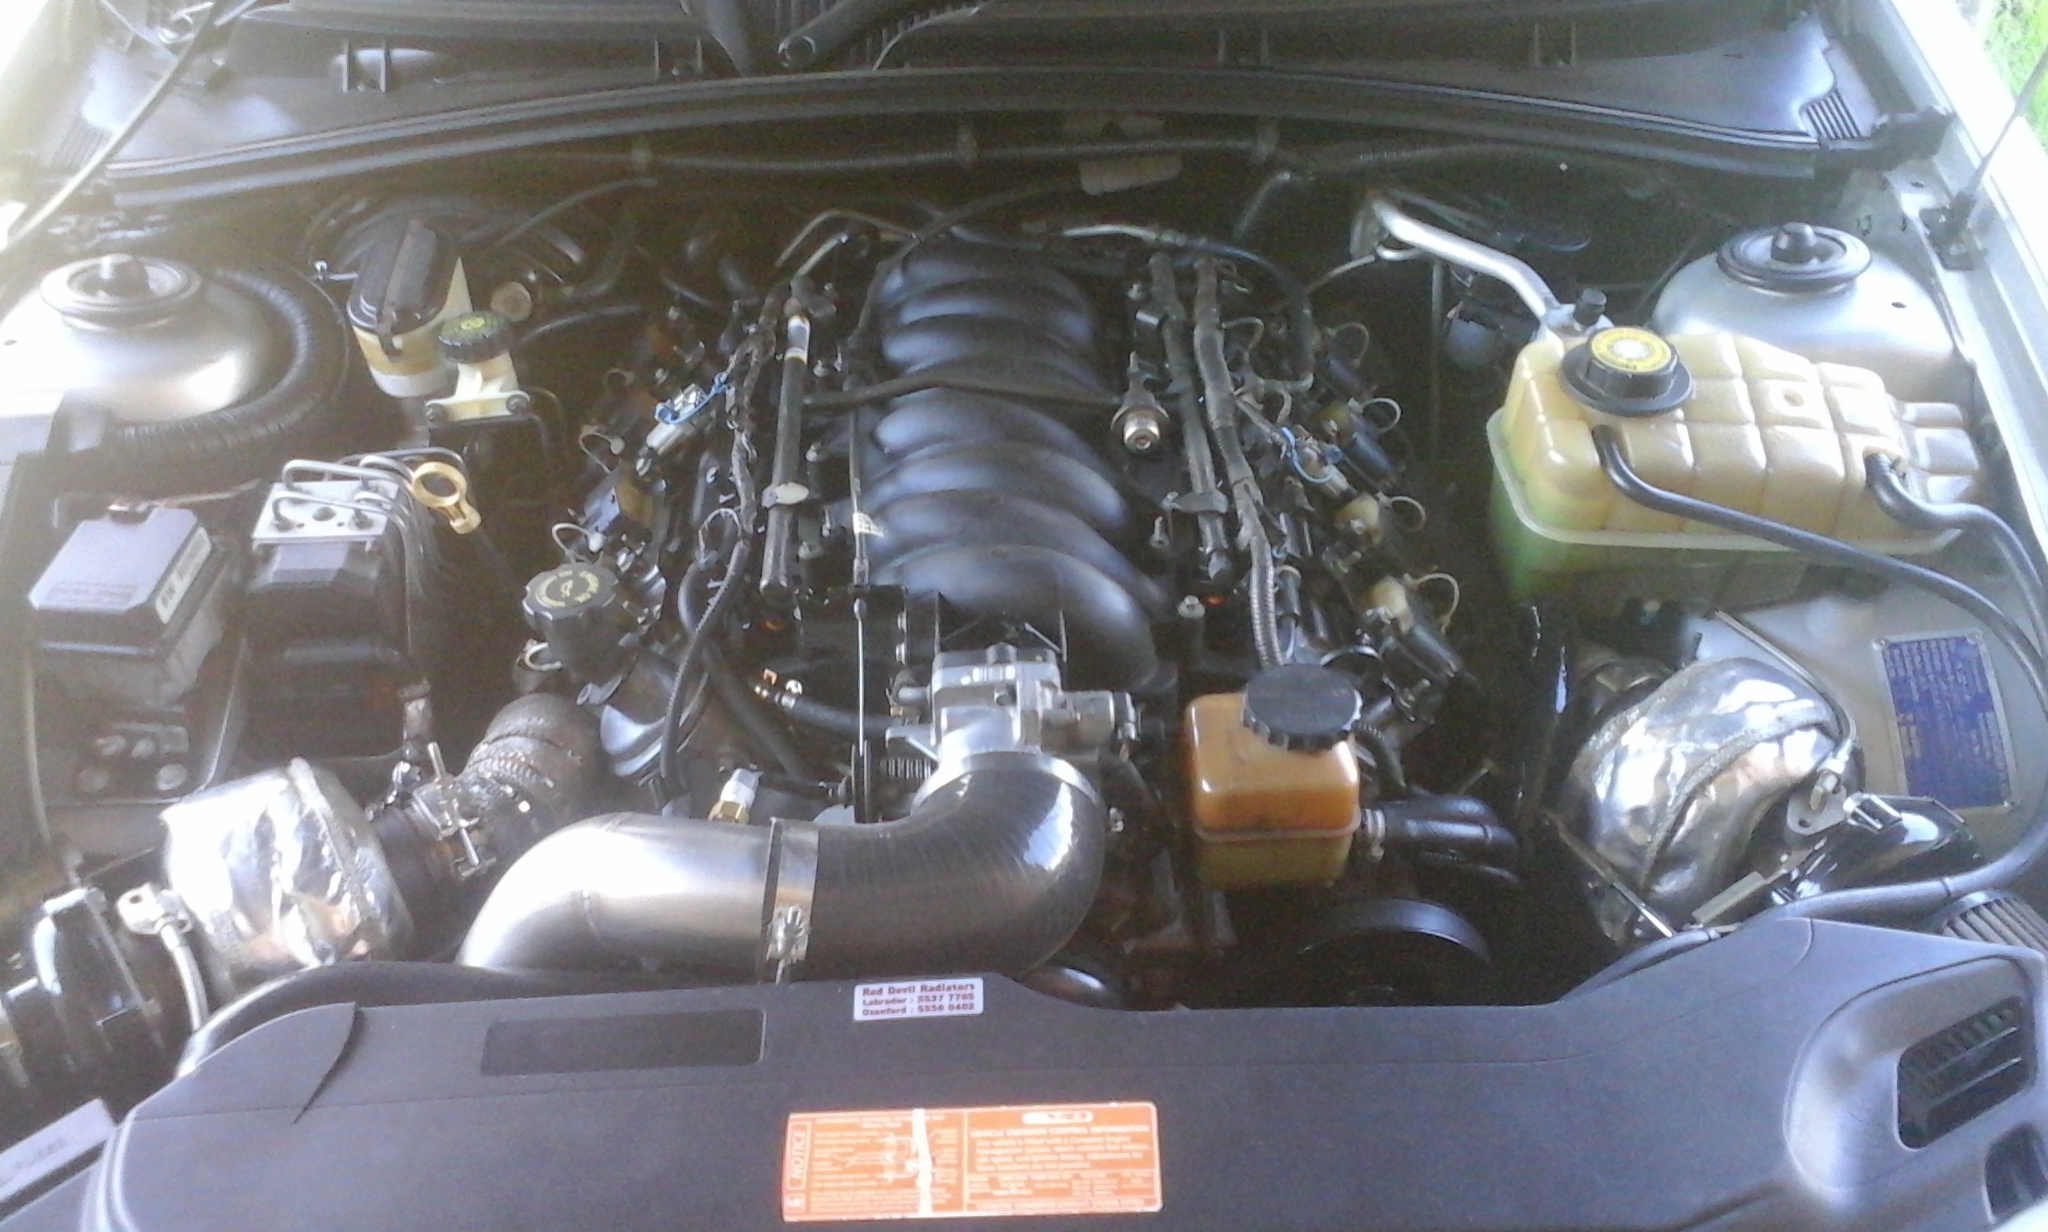 2001 Holden Commodore SS VY